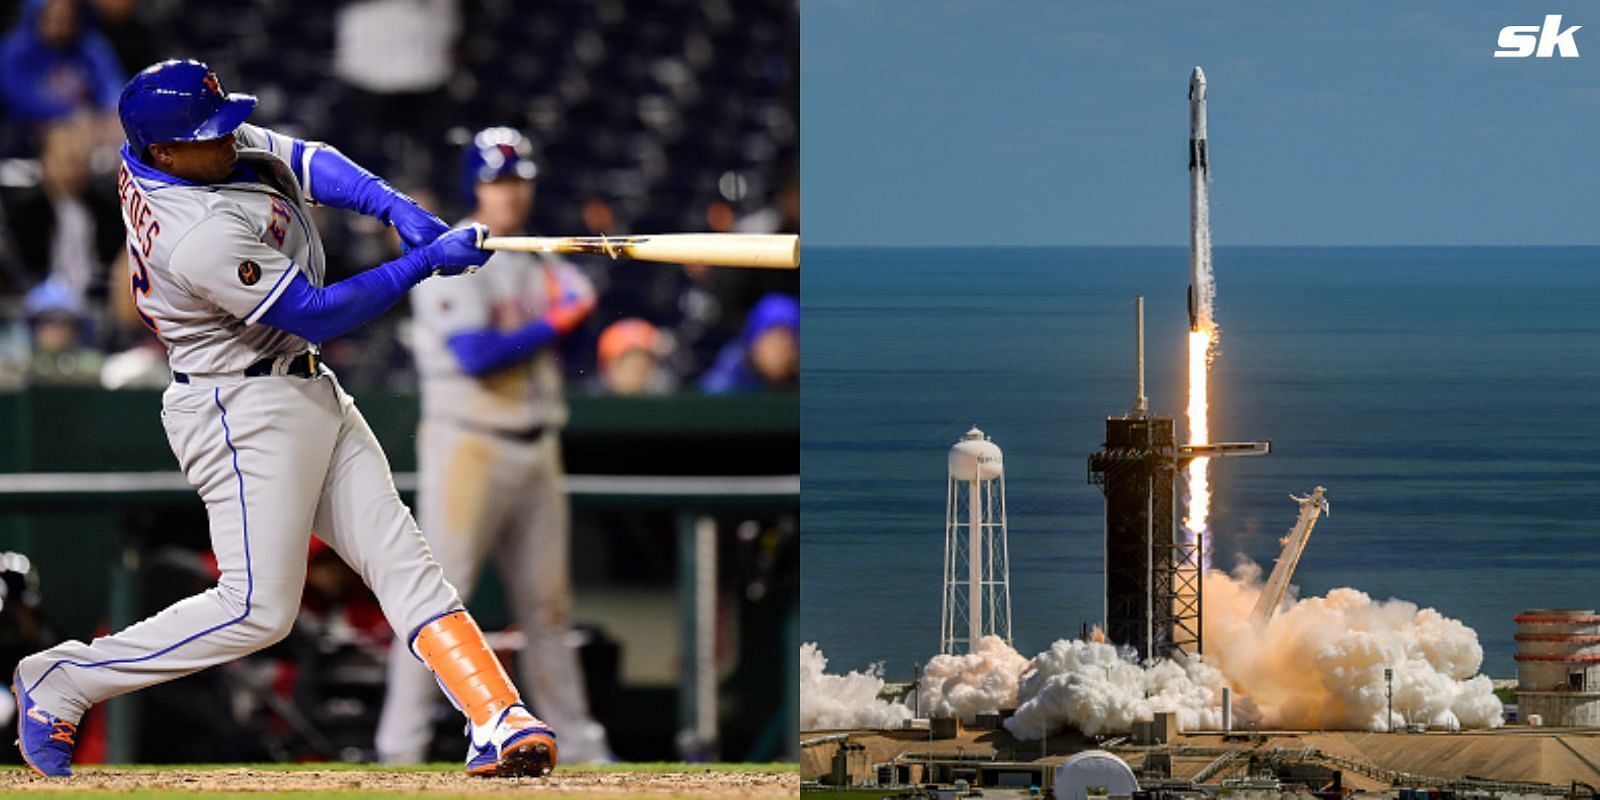 Space X Falcon 9 rocket was seen in the sky during the Mets 7-3 defeat against Nationals 